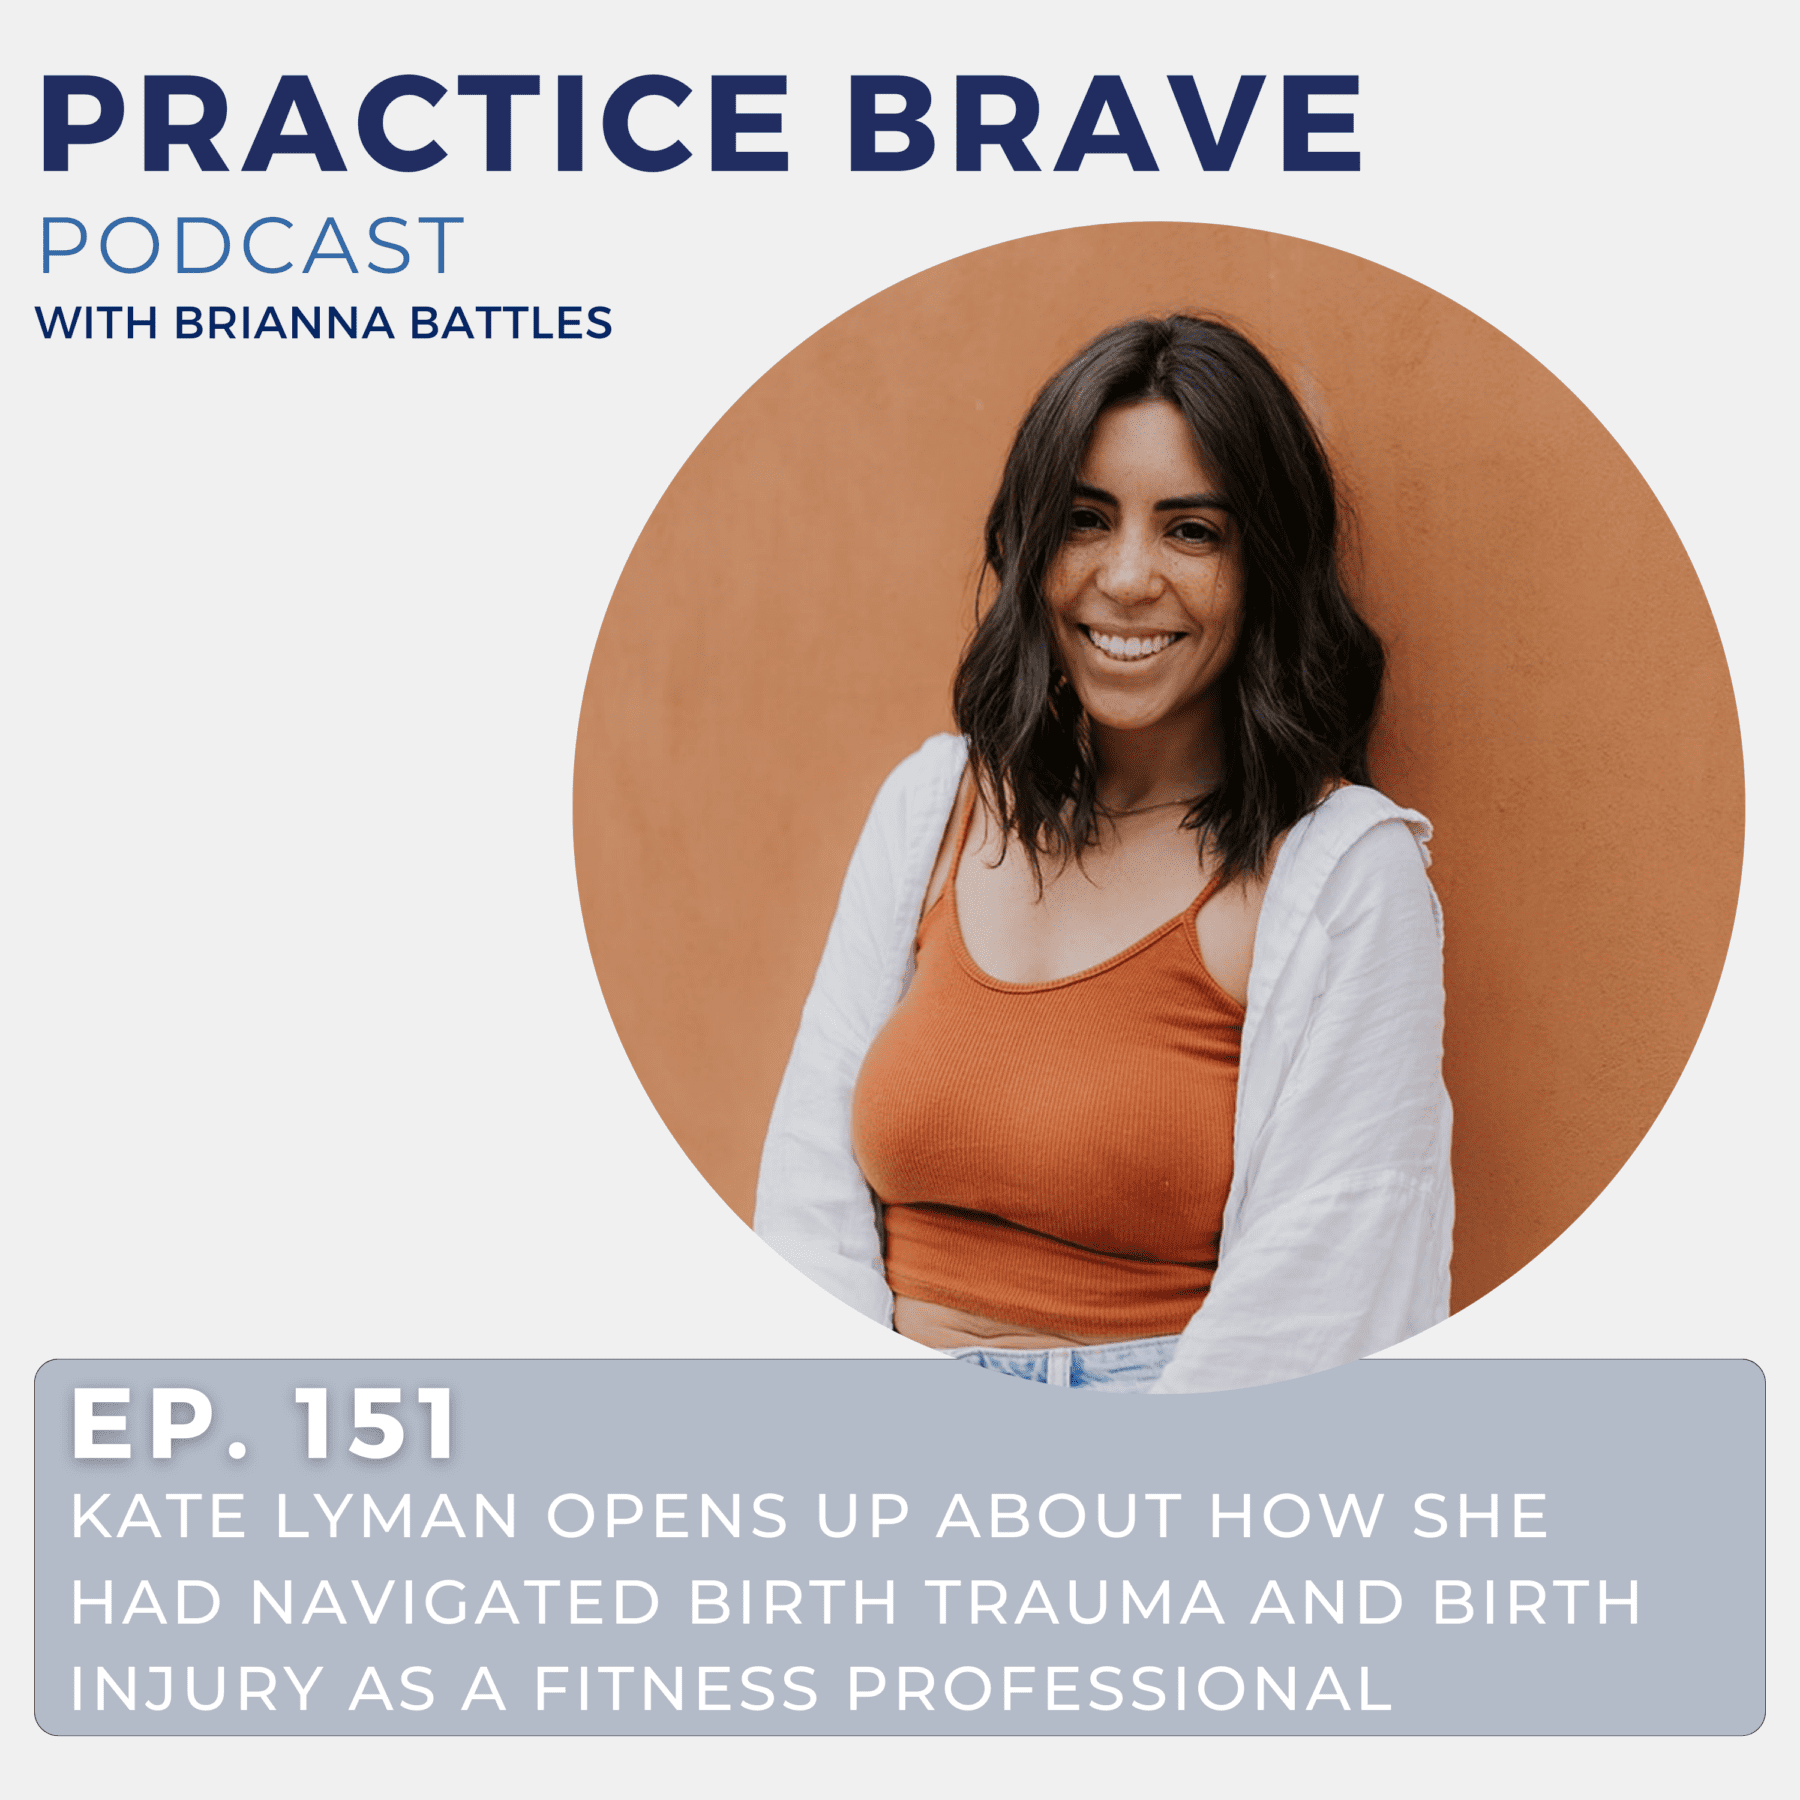 151 - Kate Lyman Opens Up About How She Had Navigated Birth Trauma and Birth Injury as a Fitness Professional - Practice Brave with Brianna Battles